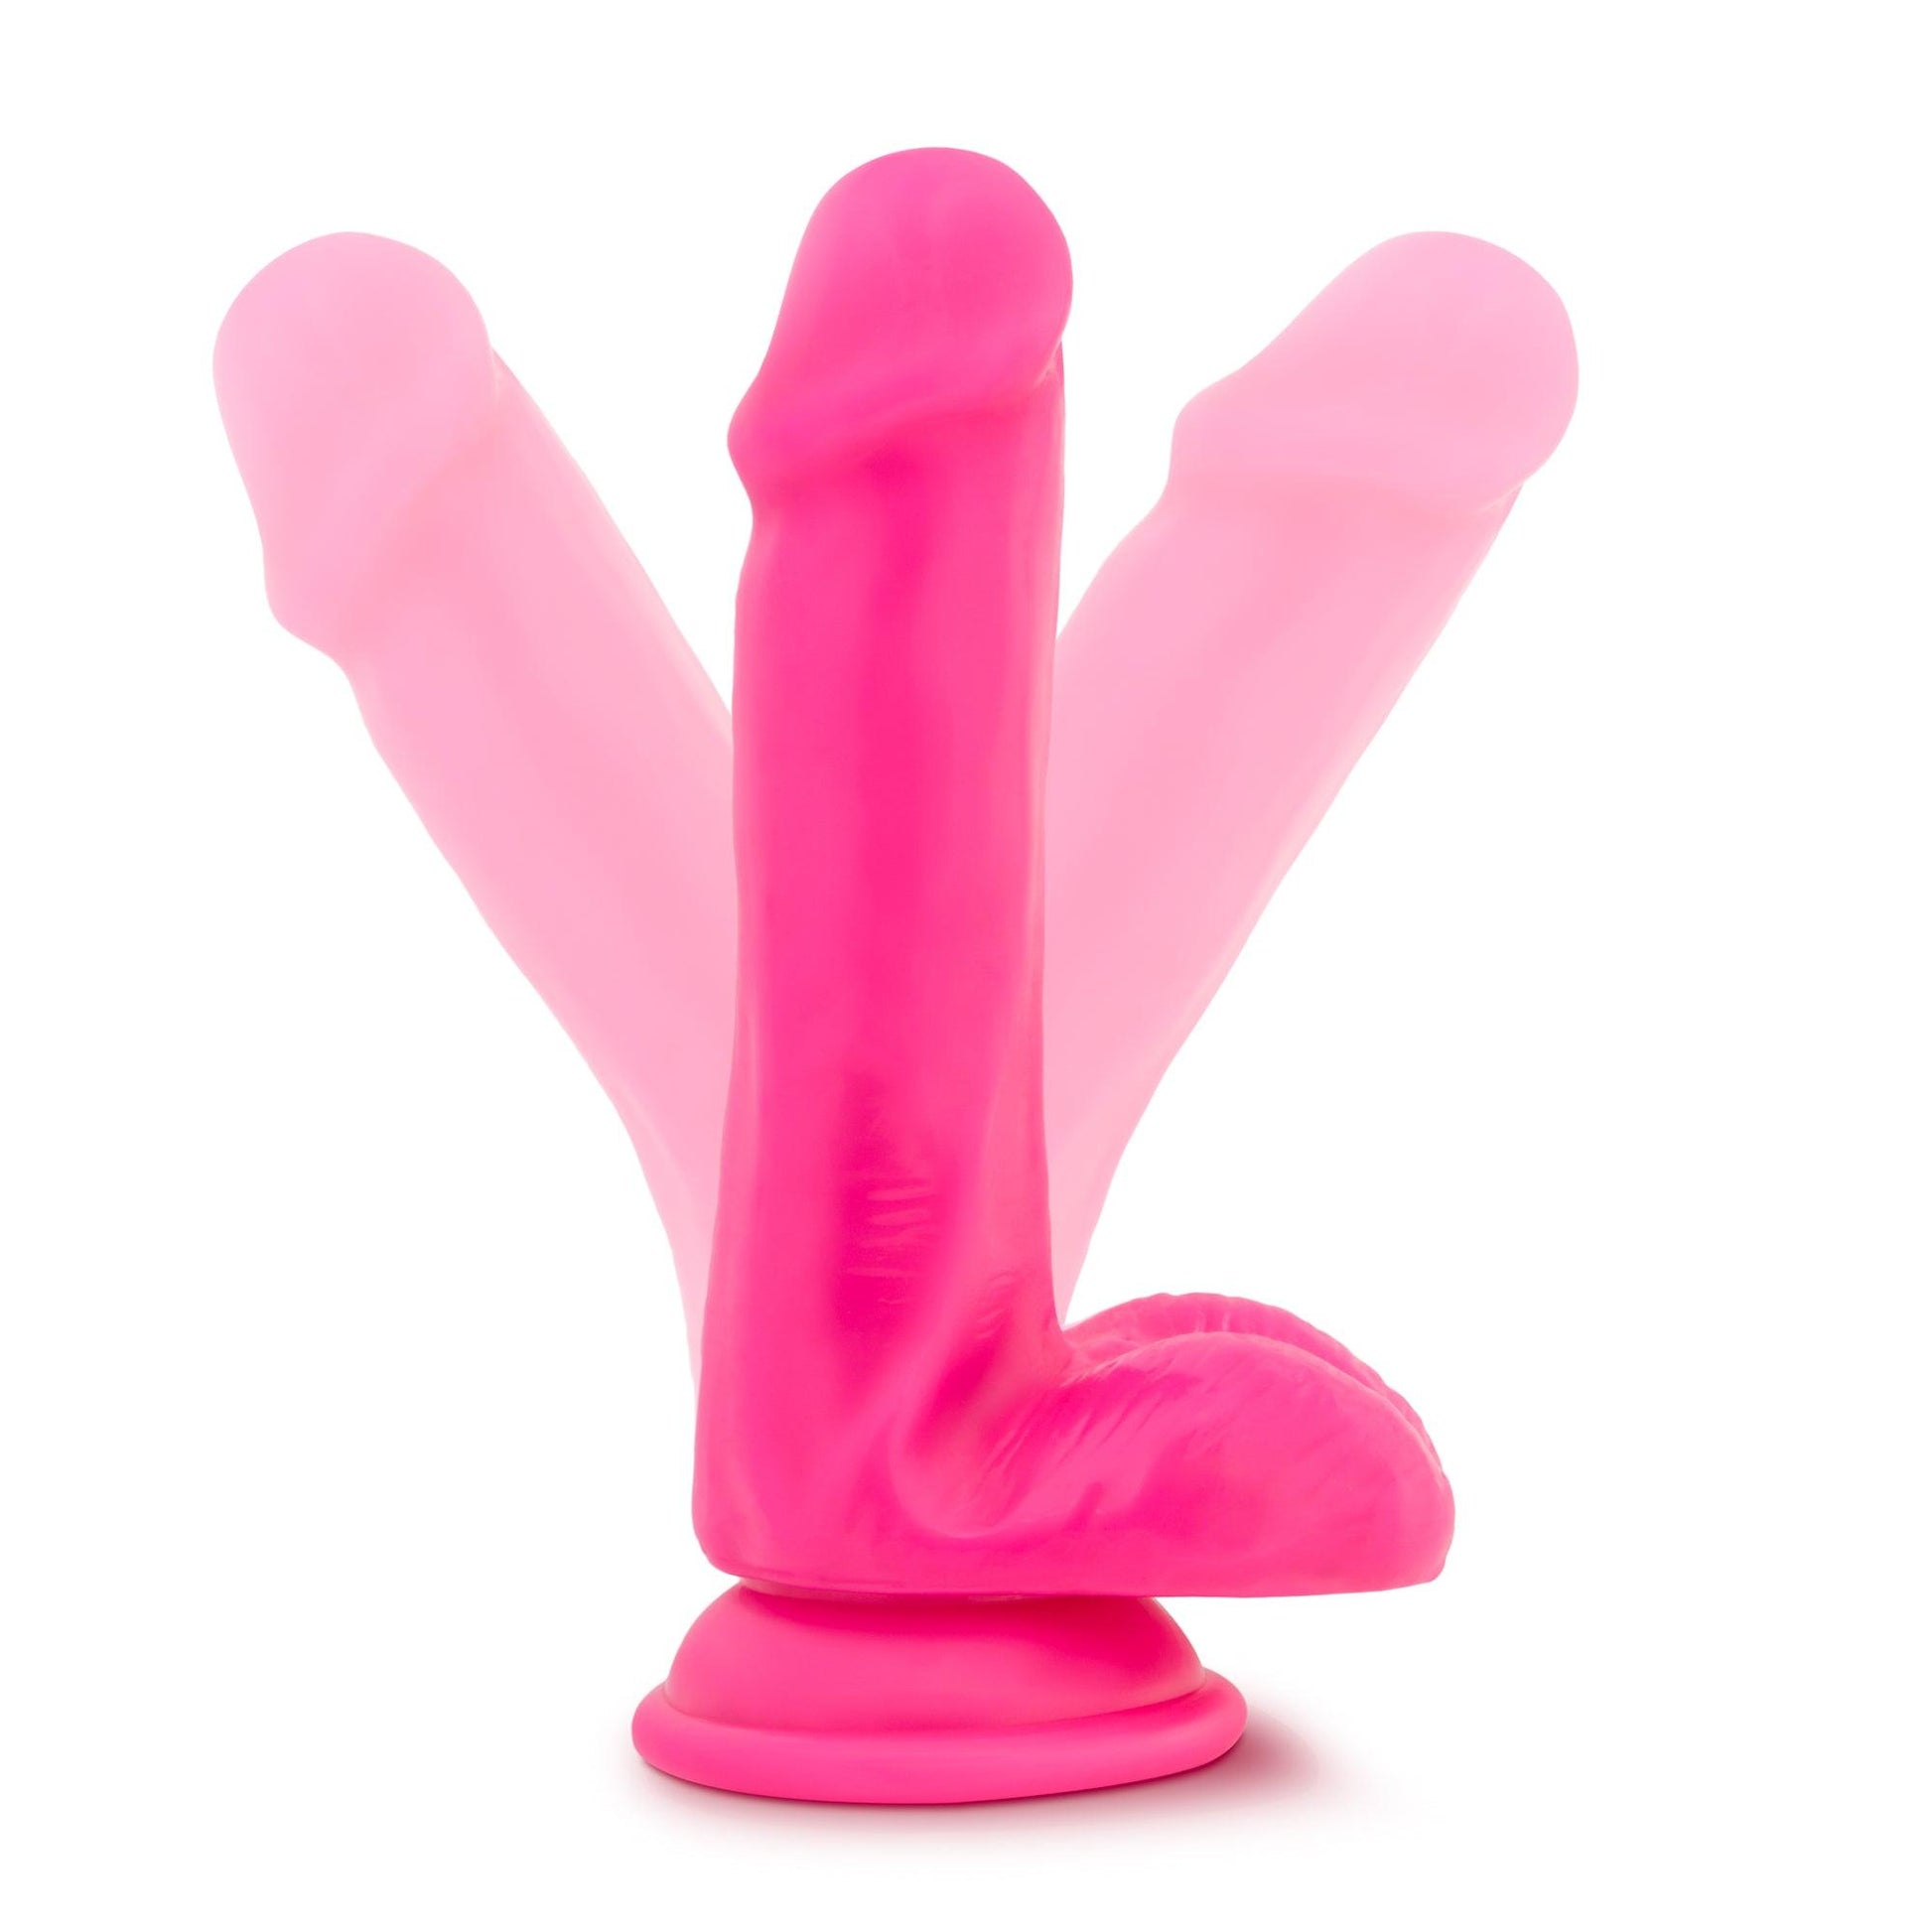 Neo Dual Density Cock With Balls 6 Inch Neon Pink - Take A Peek